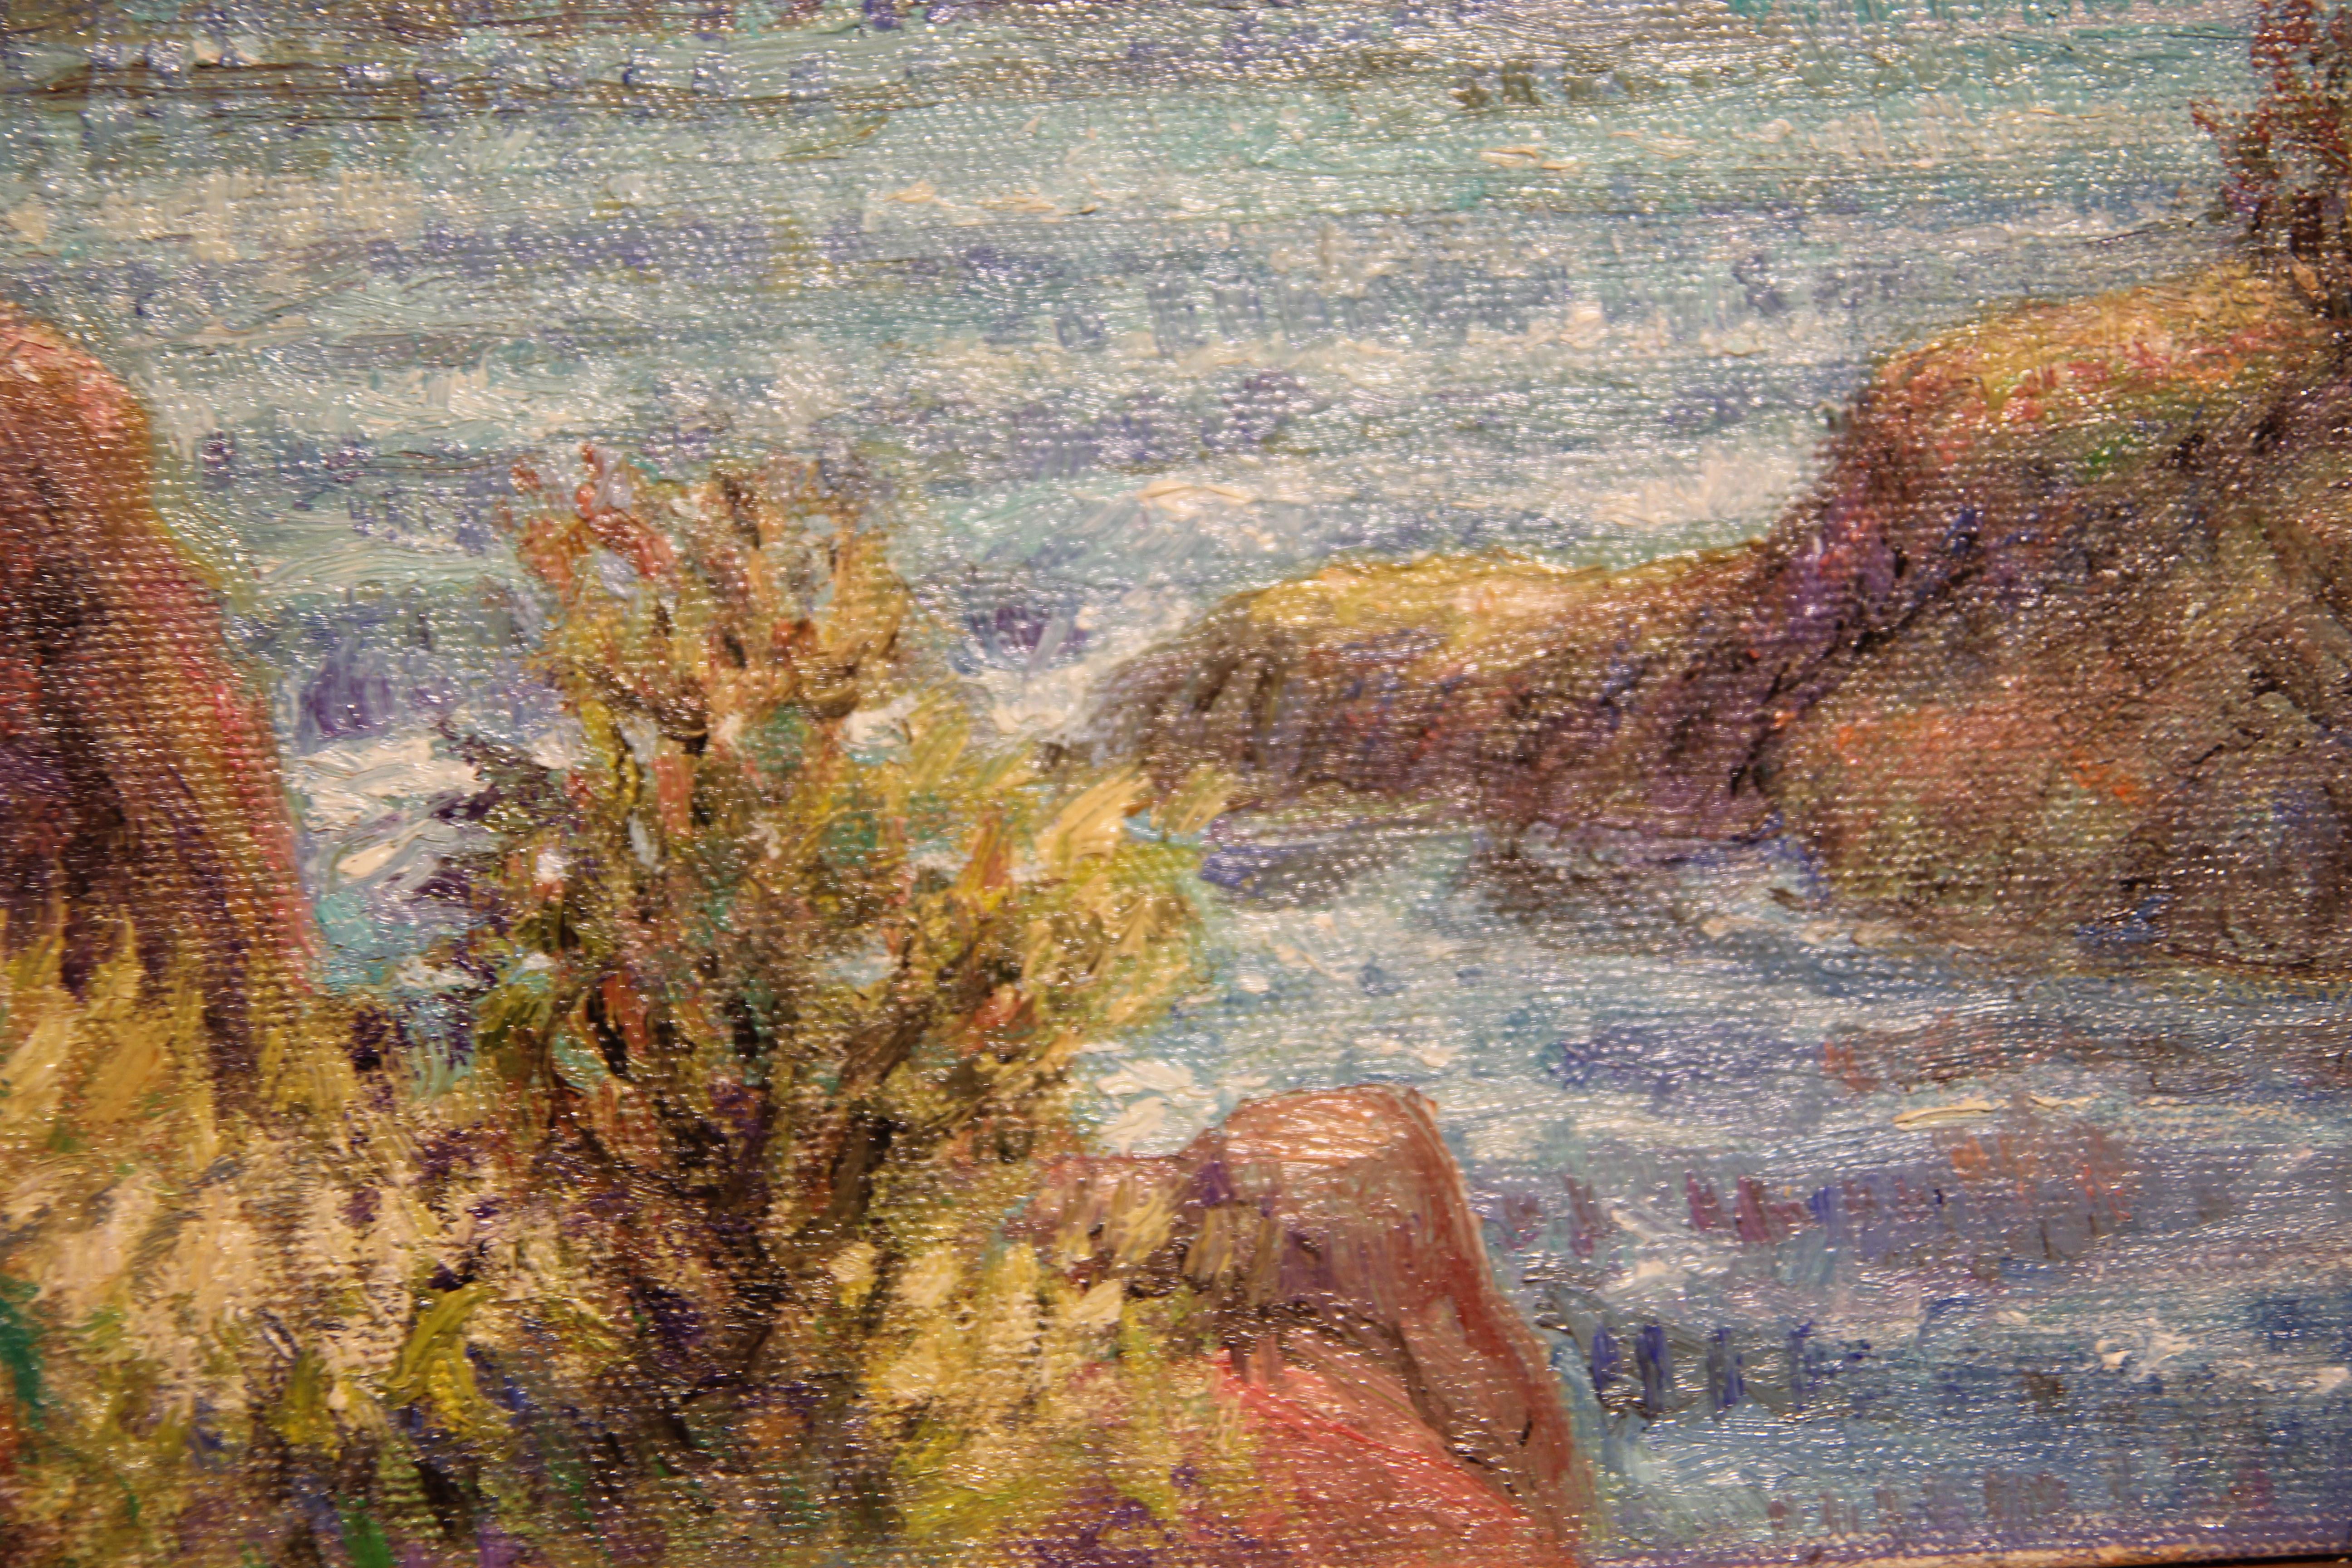 “Cliffside” Contemporary Impressionist Seaside Landscape Nature Painting - Brown Abstract Painting by Henry David Potwin